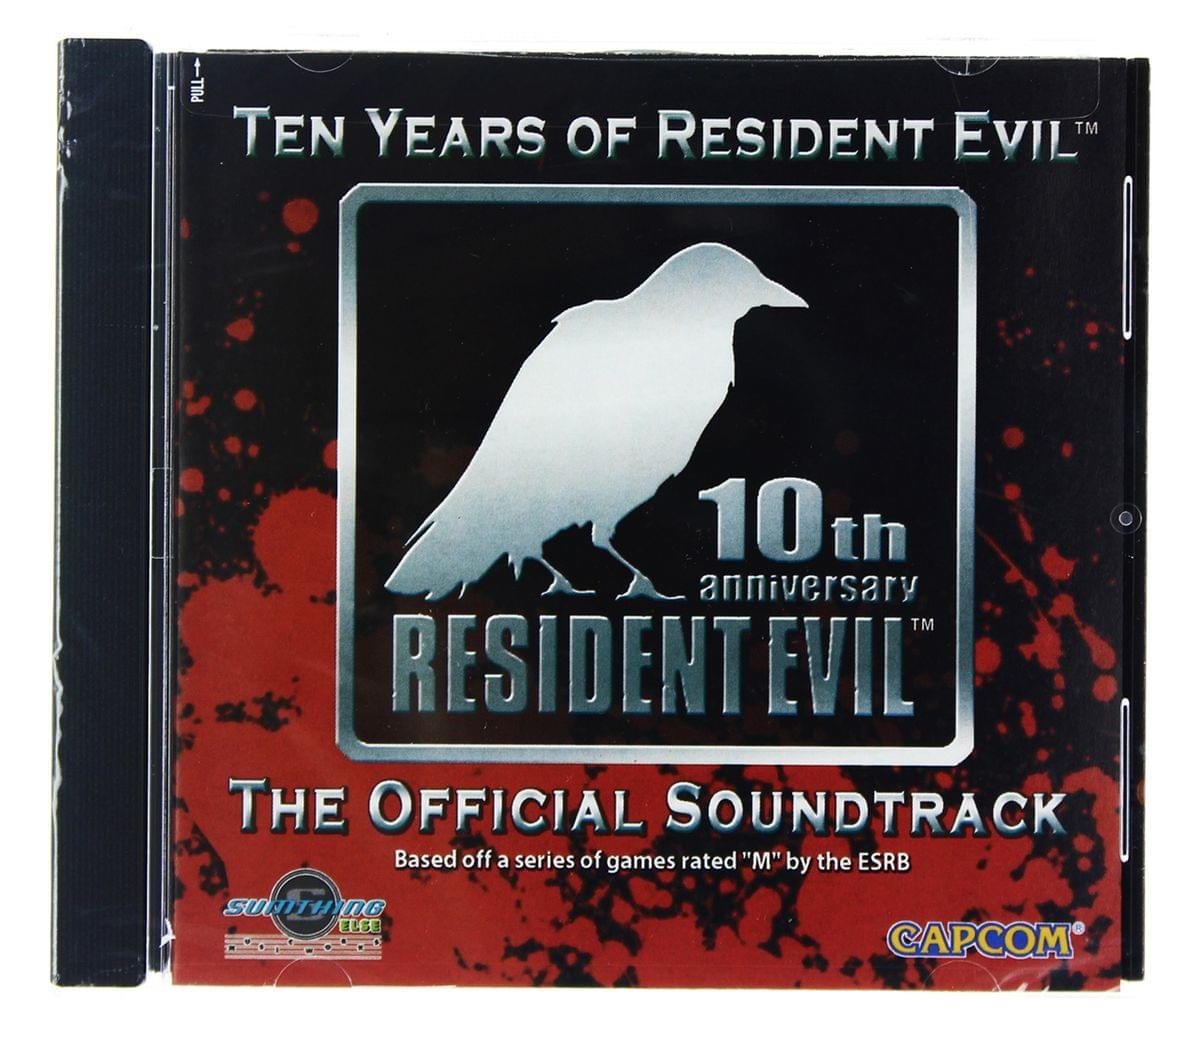 Resident Evil (Ten Years) Official Game Soundtrack CD